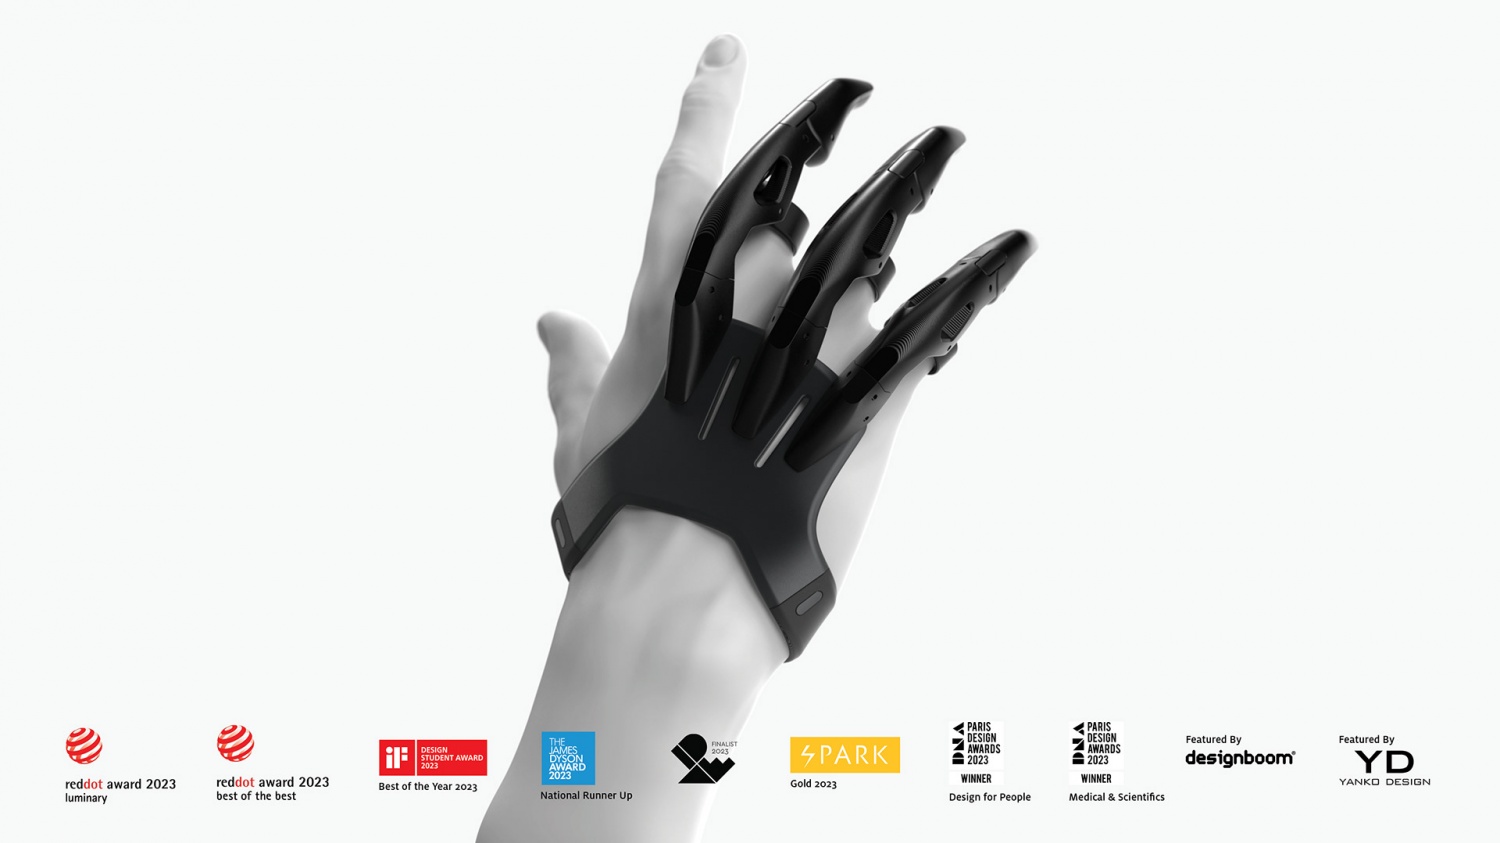 3D Printable Finger Prosthesis 'Lunet': A Game-Changer for Accessible Tech